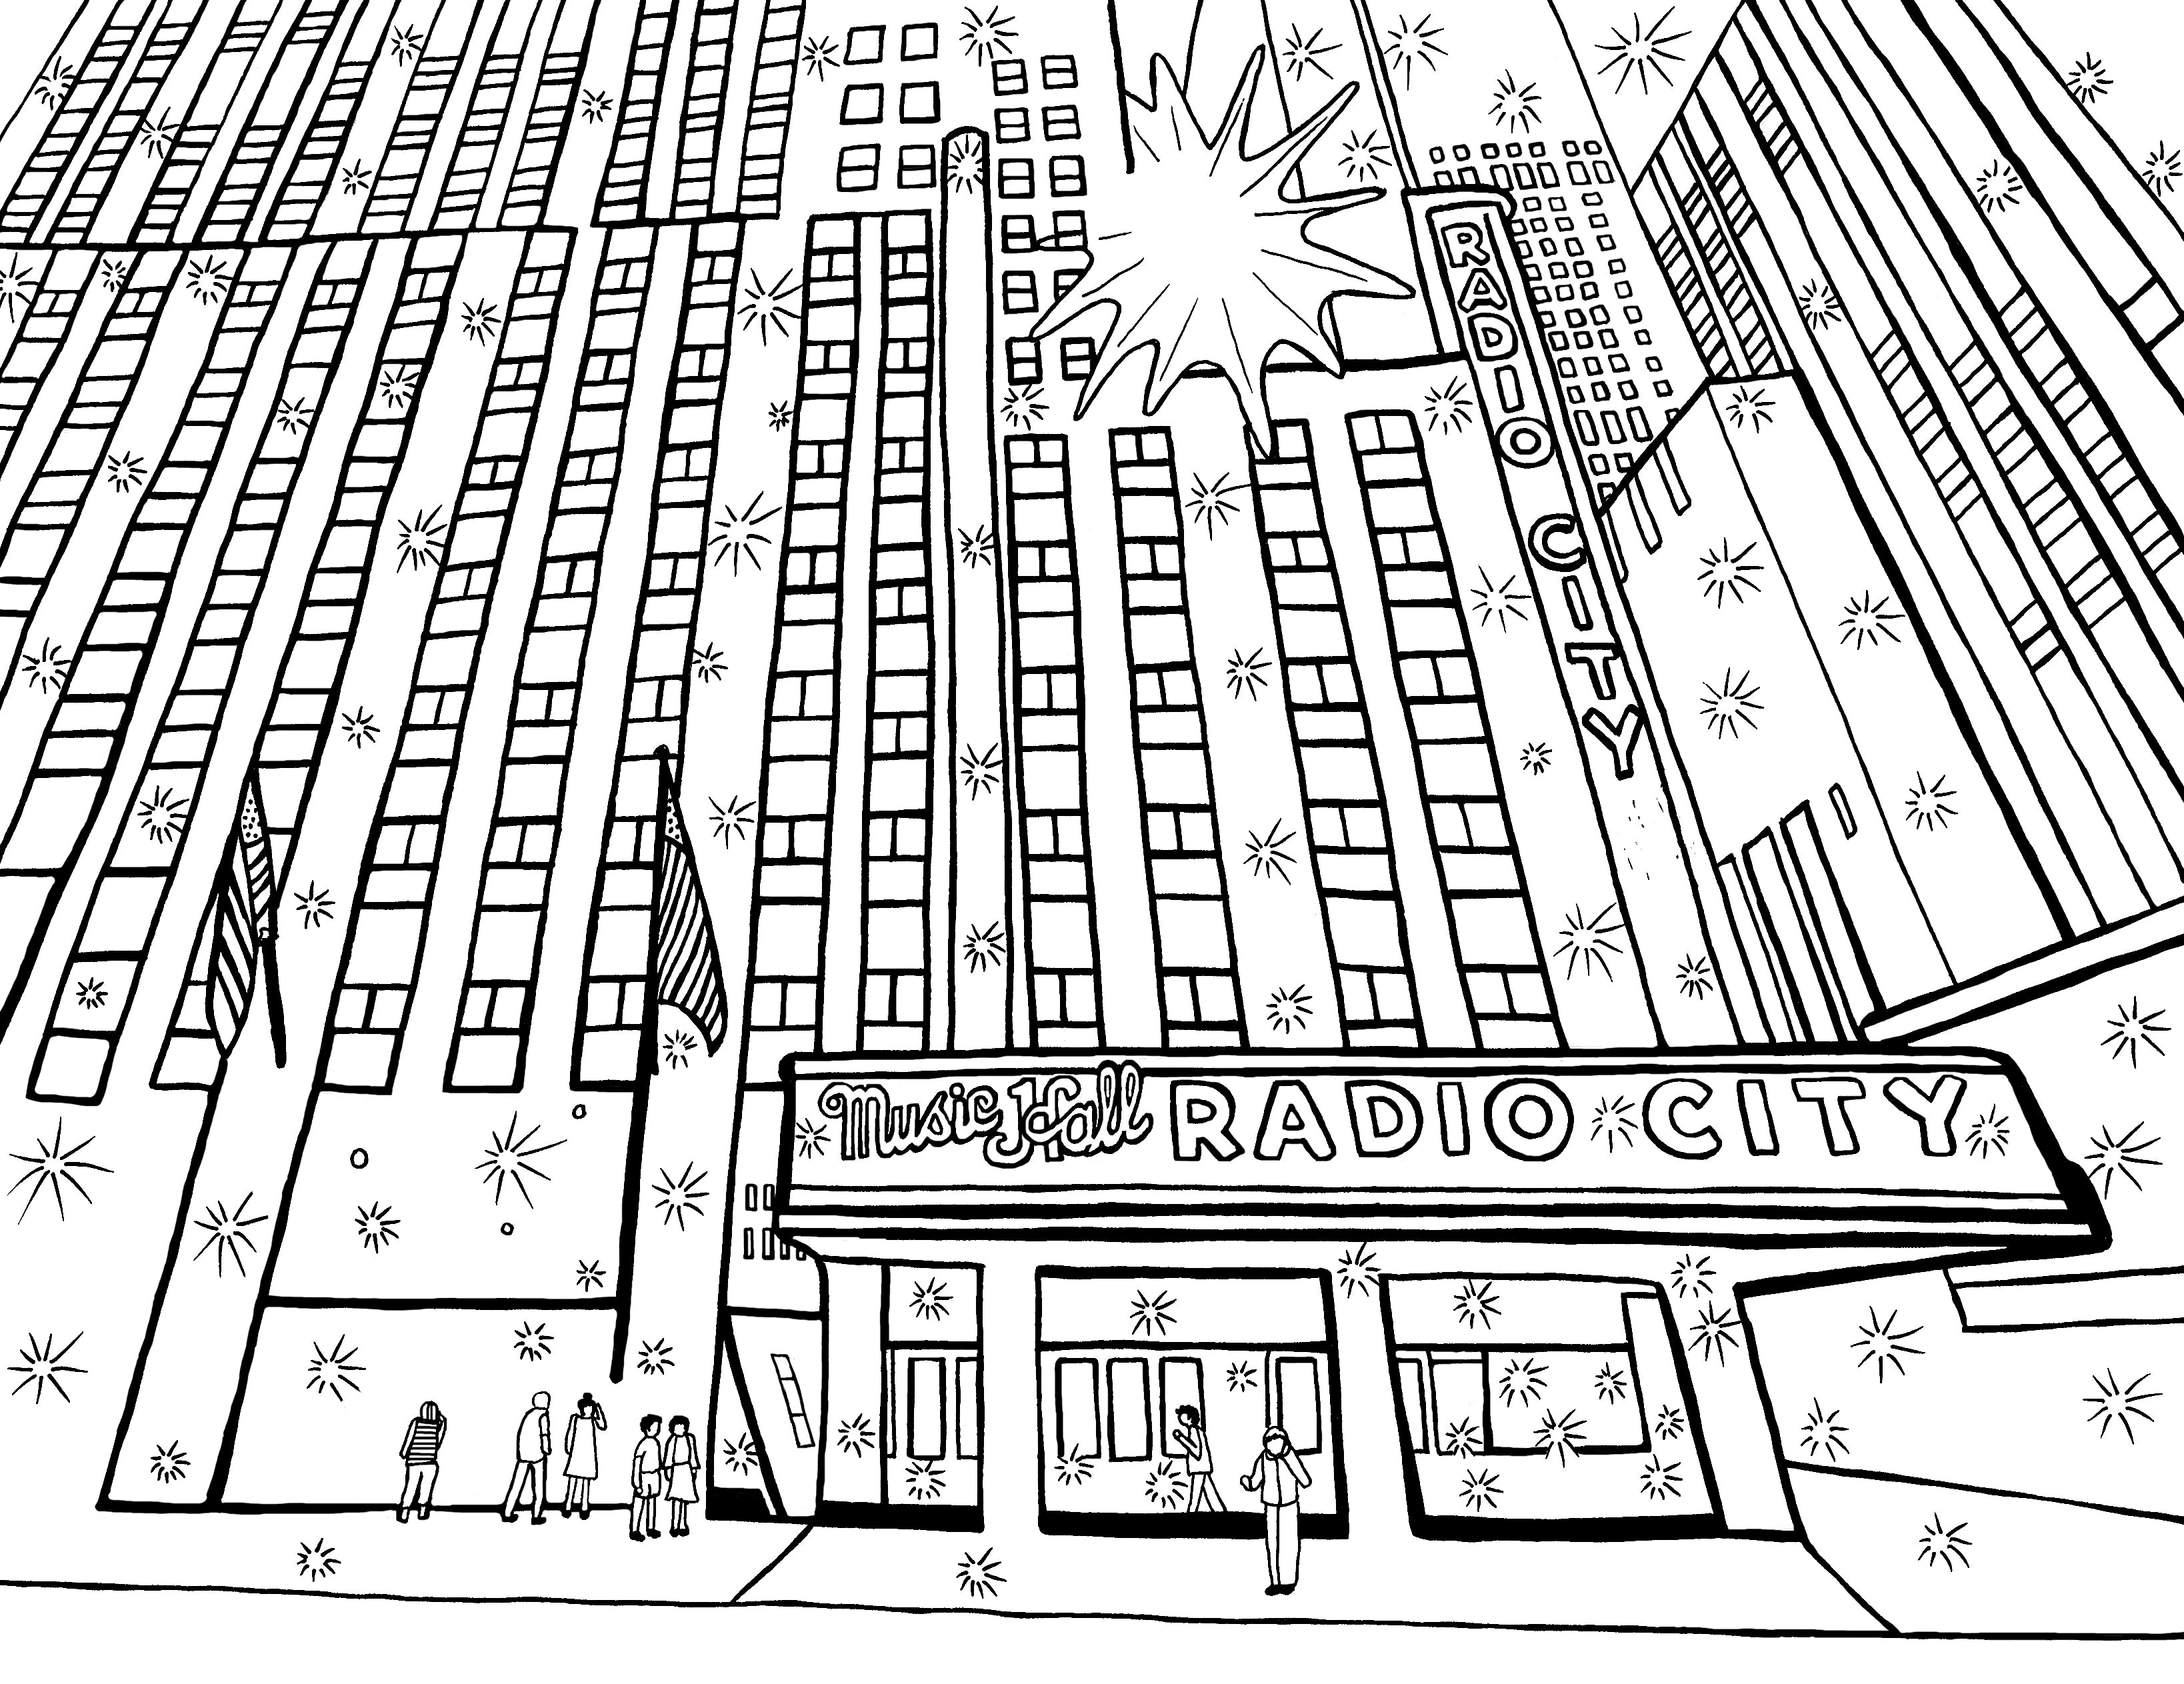 This black and white coloring page presents an artistic, perspective-skewed rendering of Radio City Music Hall in New York City. The iconic marquee of the venue stands out with its bold lettering, flanked by Art Deco architectural details and stylized representations of stars. Several figures are depicted strolling and standing in front of the building, evoking a lively urban scene. Free coloring page :: You-Color